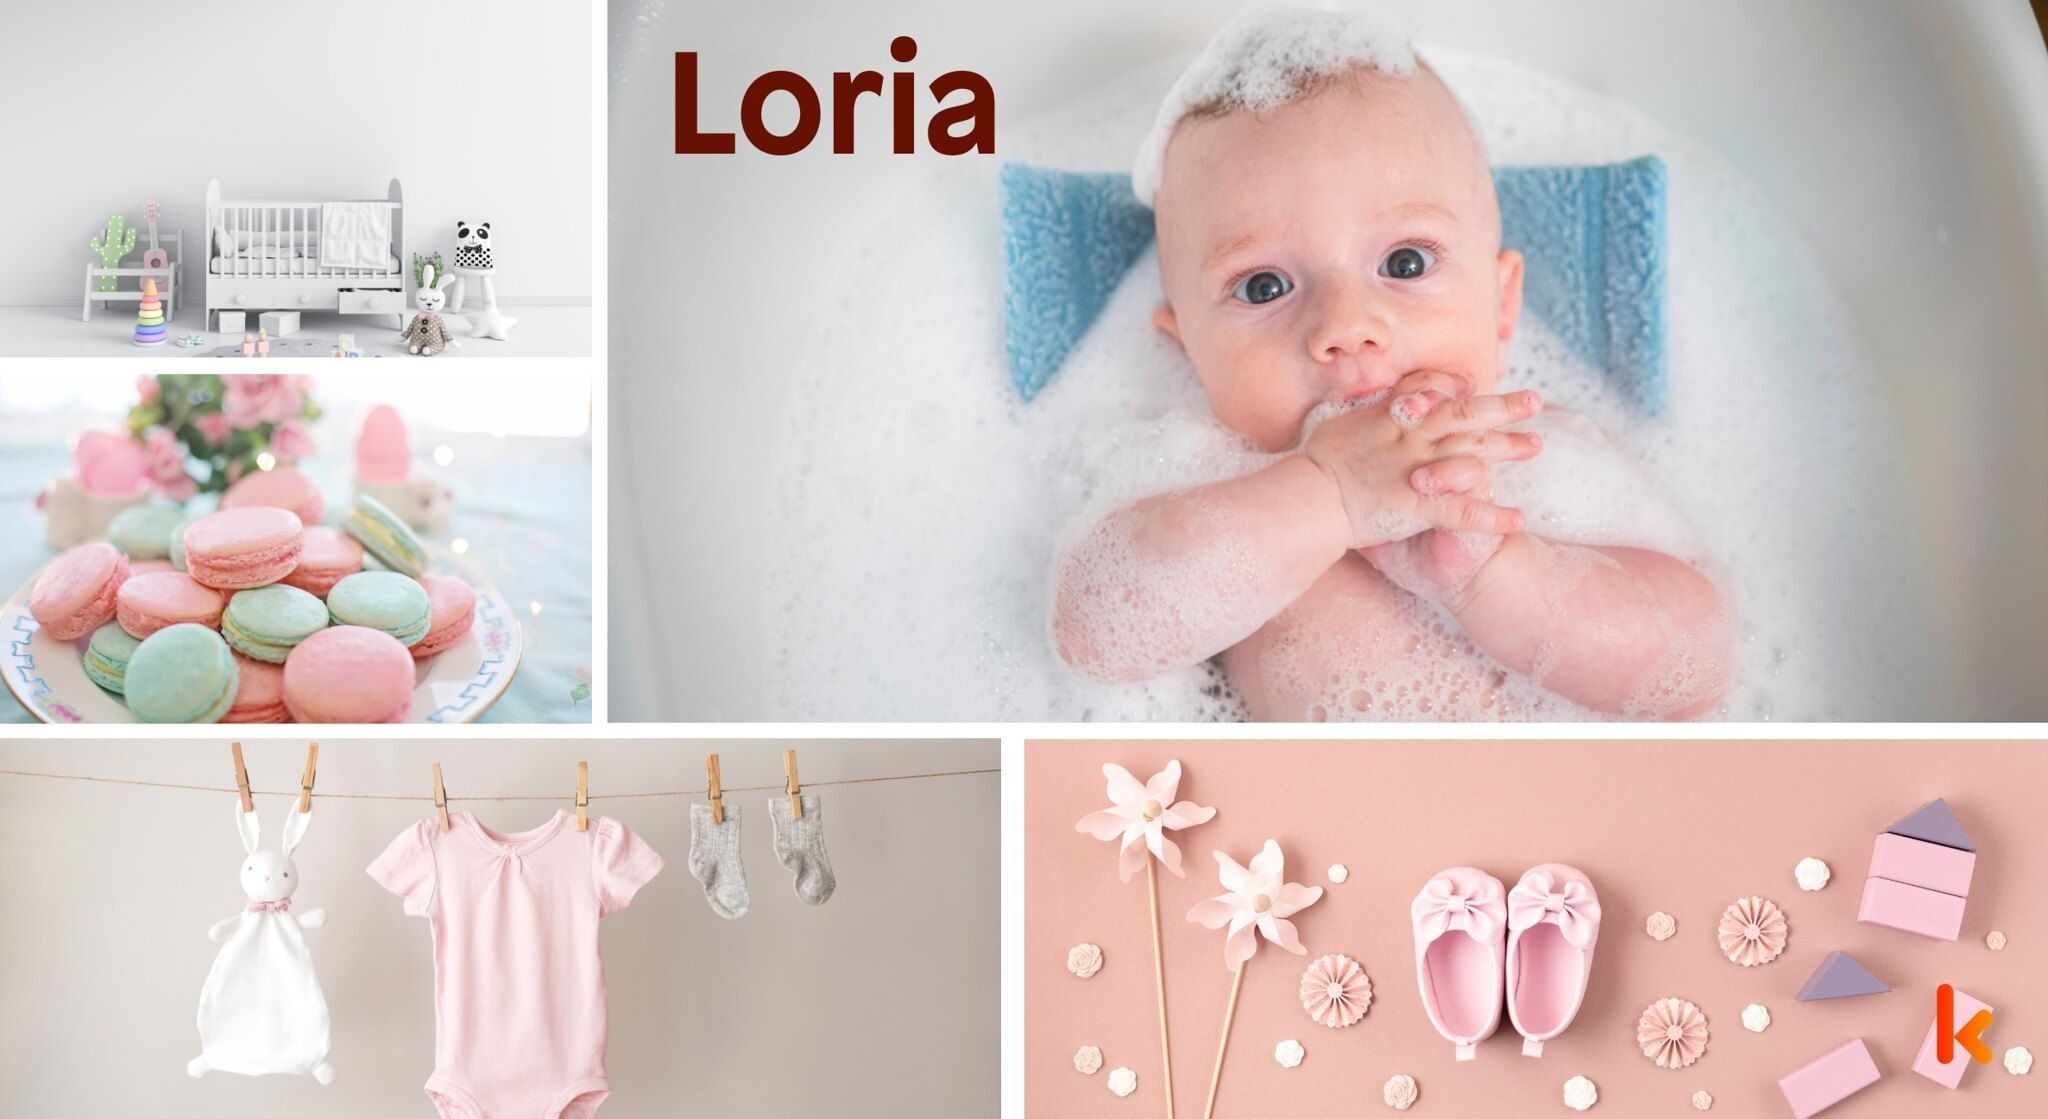 Meaning of the name Loria